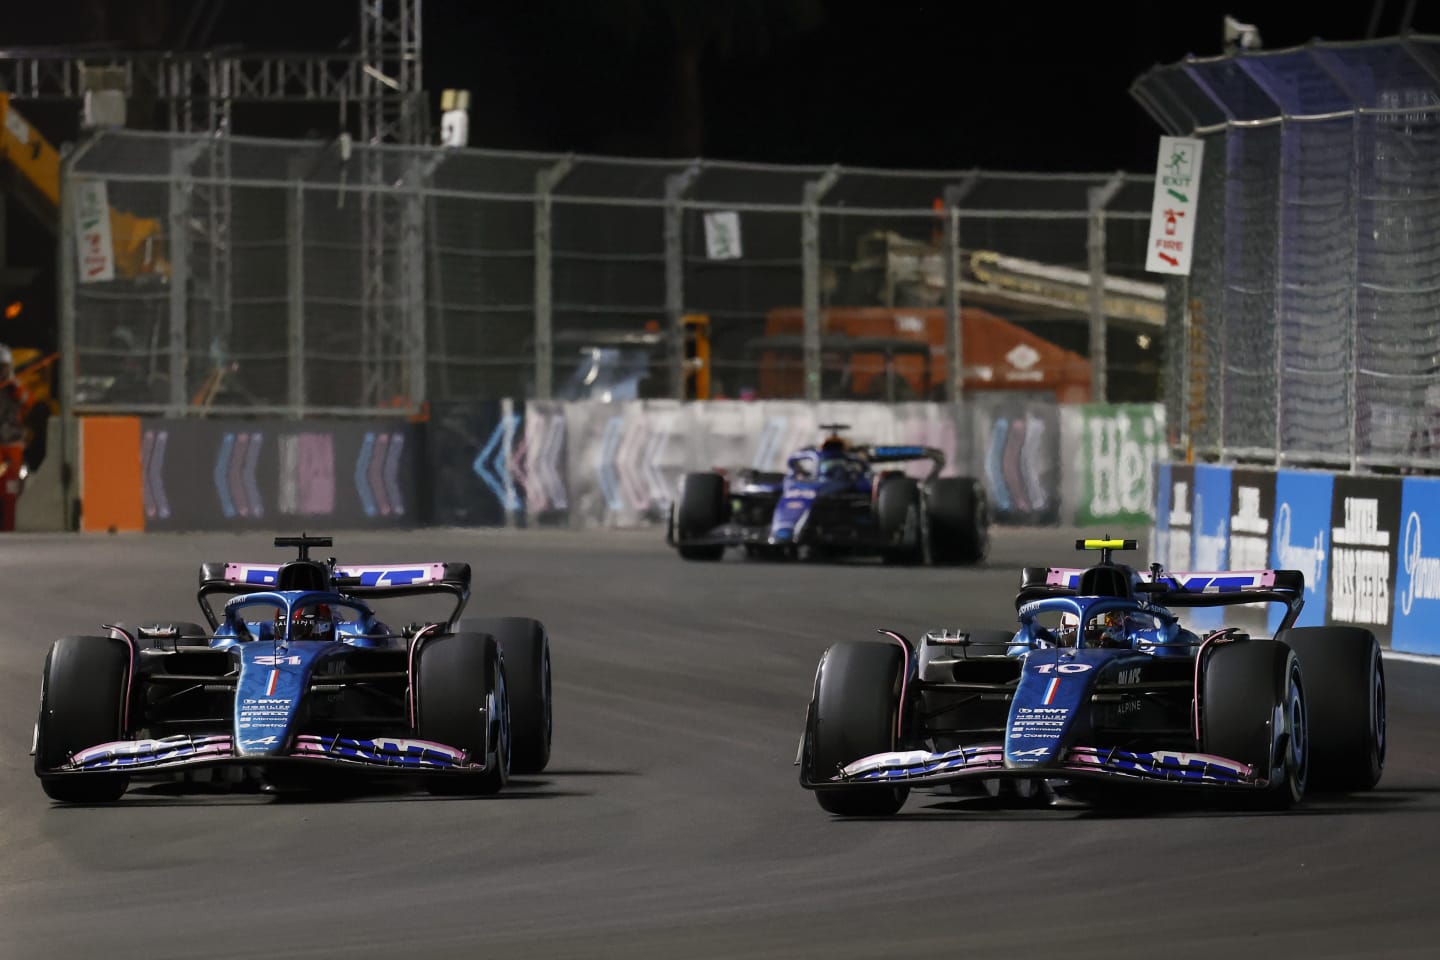 LAS VEGAS, NEVADA - NOVEMBER 18: Esteban Ocon of France driving the (31) Alpine F1 A523 Renault and Pierre Gasly of France driving the (10) Alpine F1 A523 Renault battle for track position on track during the F1 Grand Prix of Las Vegas at Las Vegas Strip Circuit on November 18, 2023 in Las Vegas, Nevada. (Photo by Chris Graythen/Getty Images)